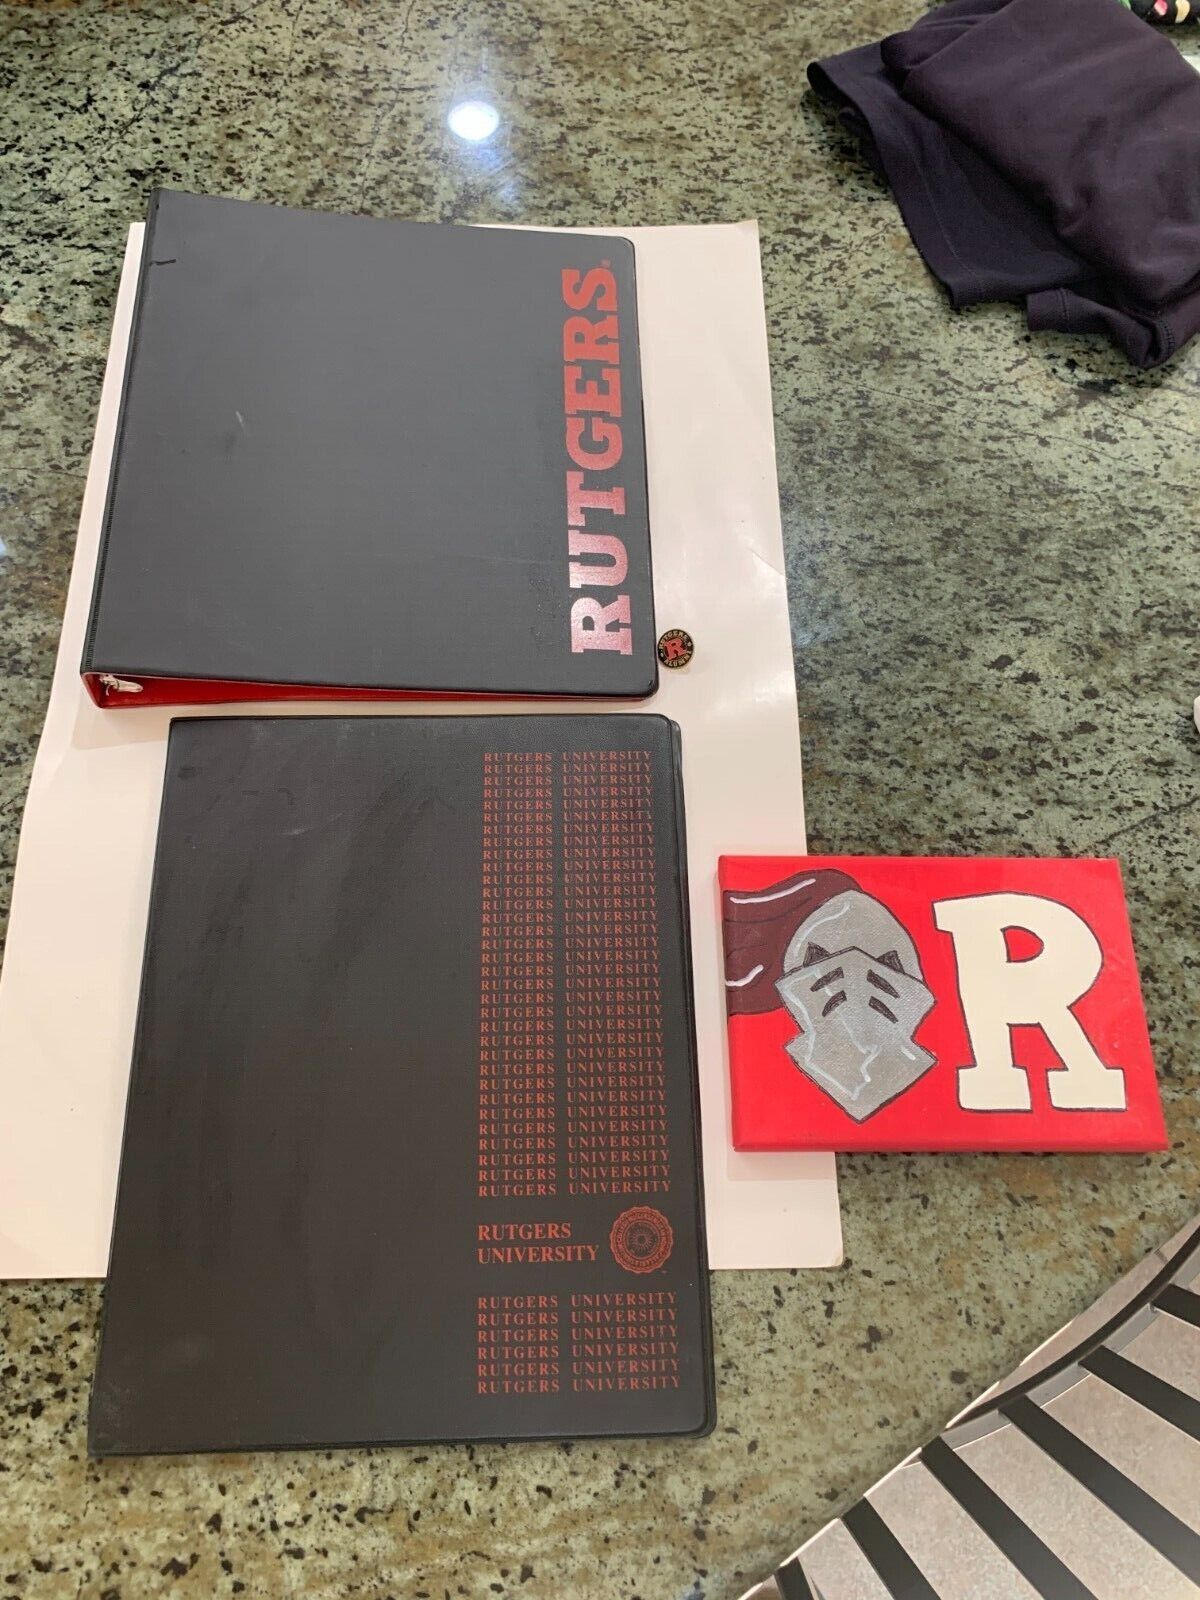 Rutgers University collectibles